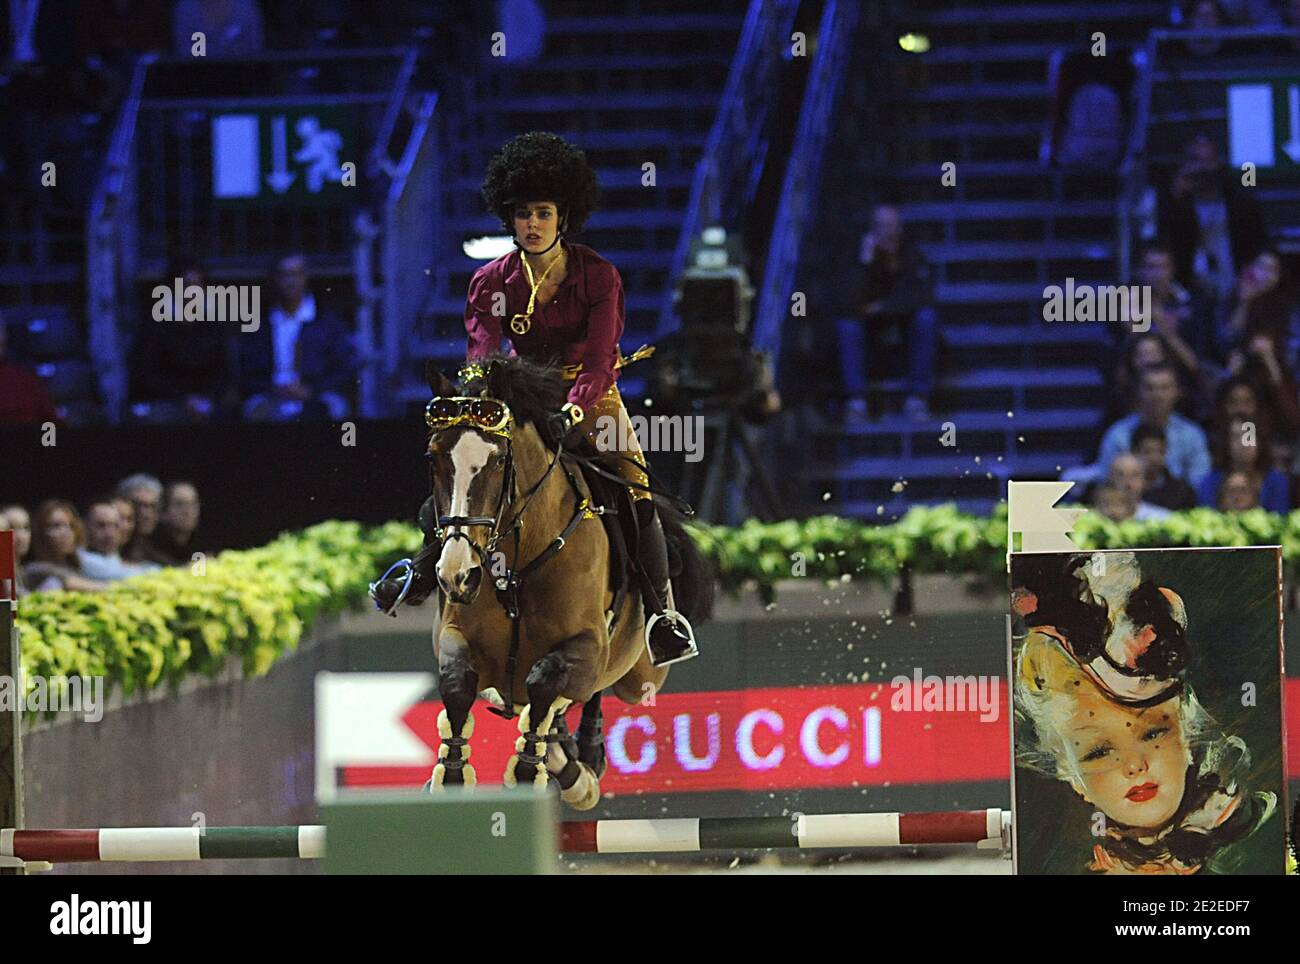 Charlotte Casiraghi participate at the Amade price during the Gucci Masters International Jumping Competition in Villepinte, North of Paris, France on December 3, 2011. Photo by Giancarlo Gorassini/ABACAPRESS.COM Stock Photo